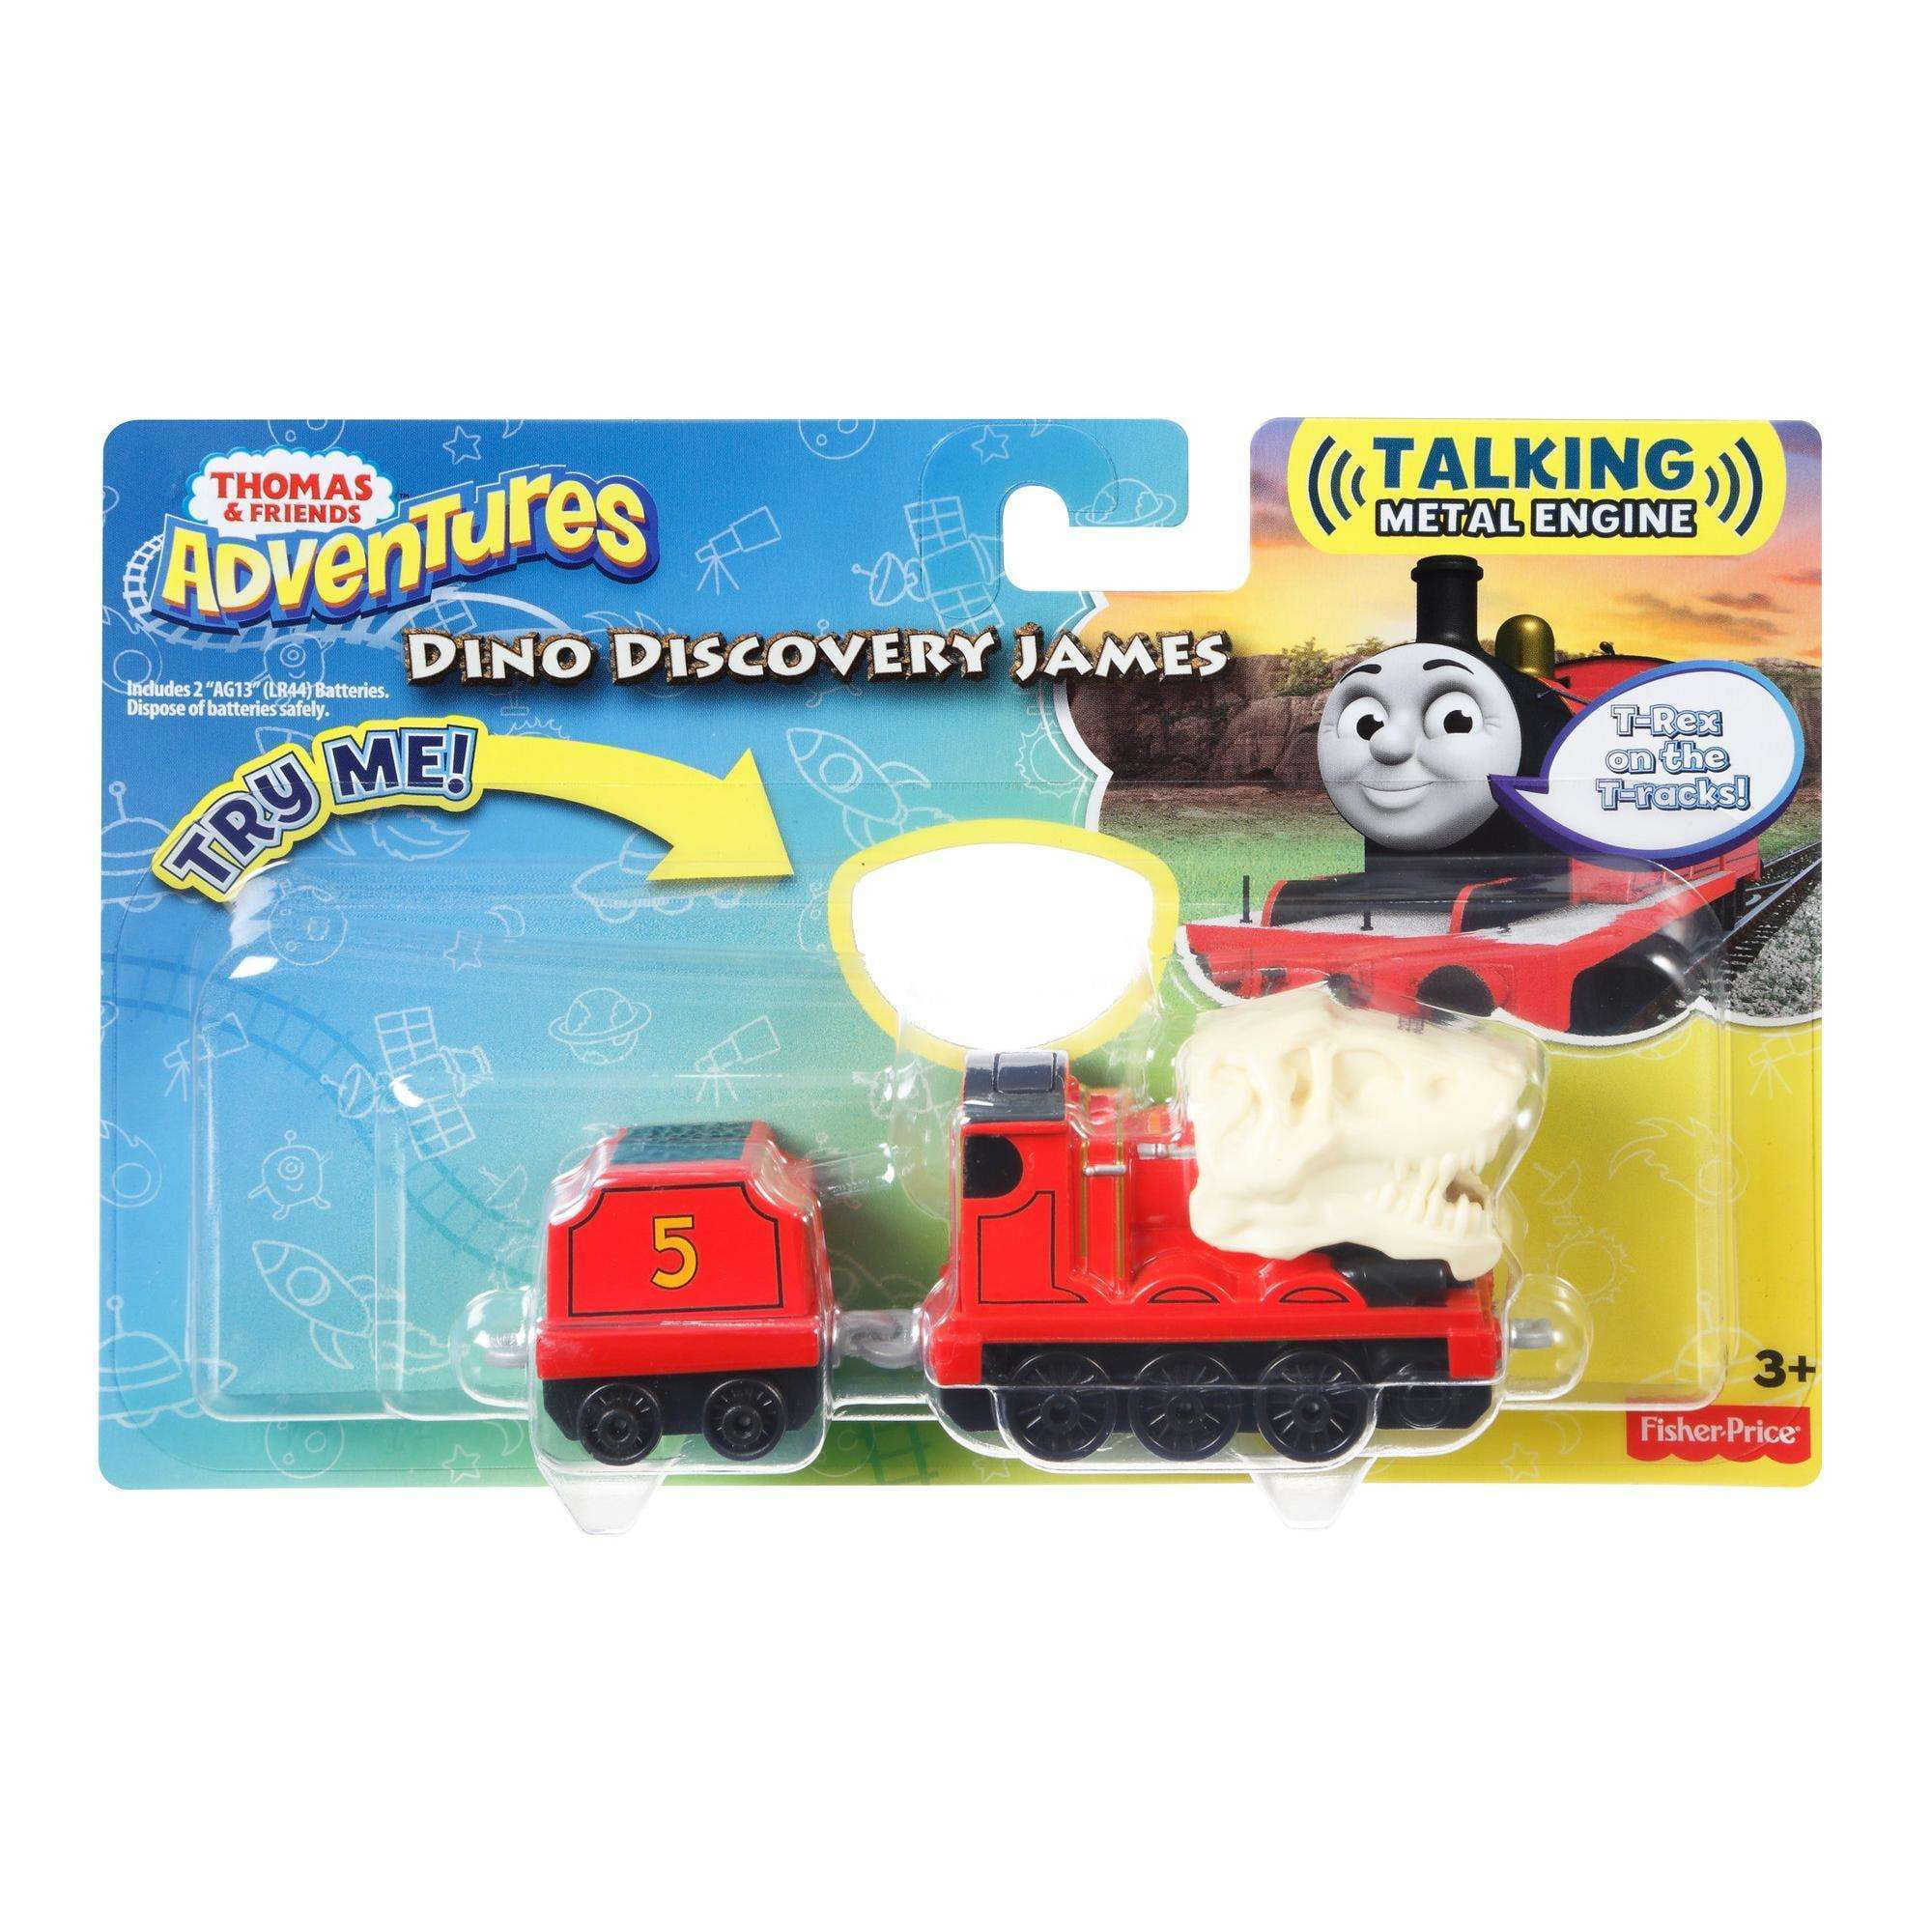 Thomas & Friends Adventures Dino Discovery James with Cargo